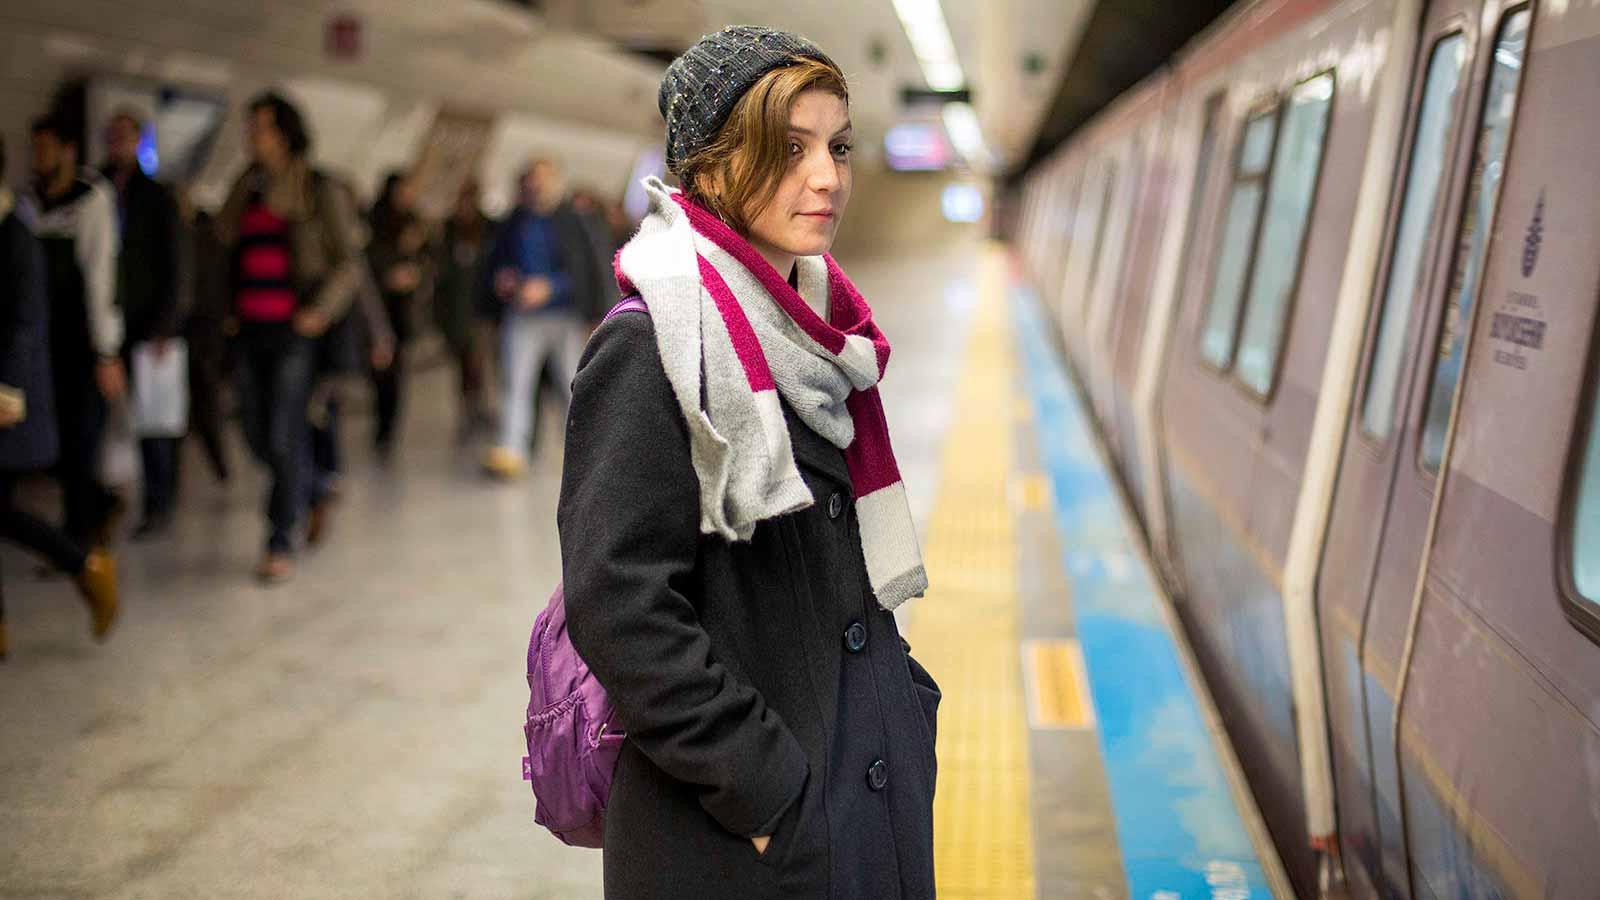 A woman wearing a hat stands on a subway platform